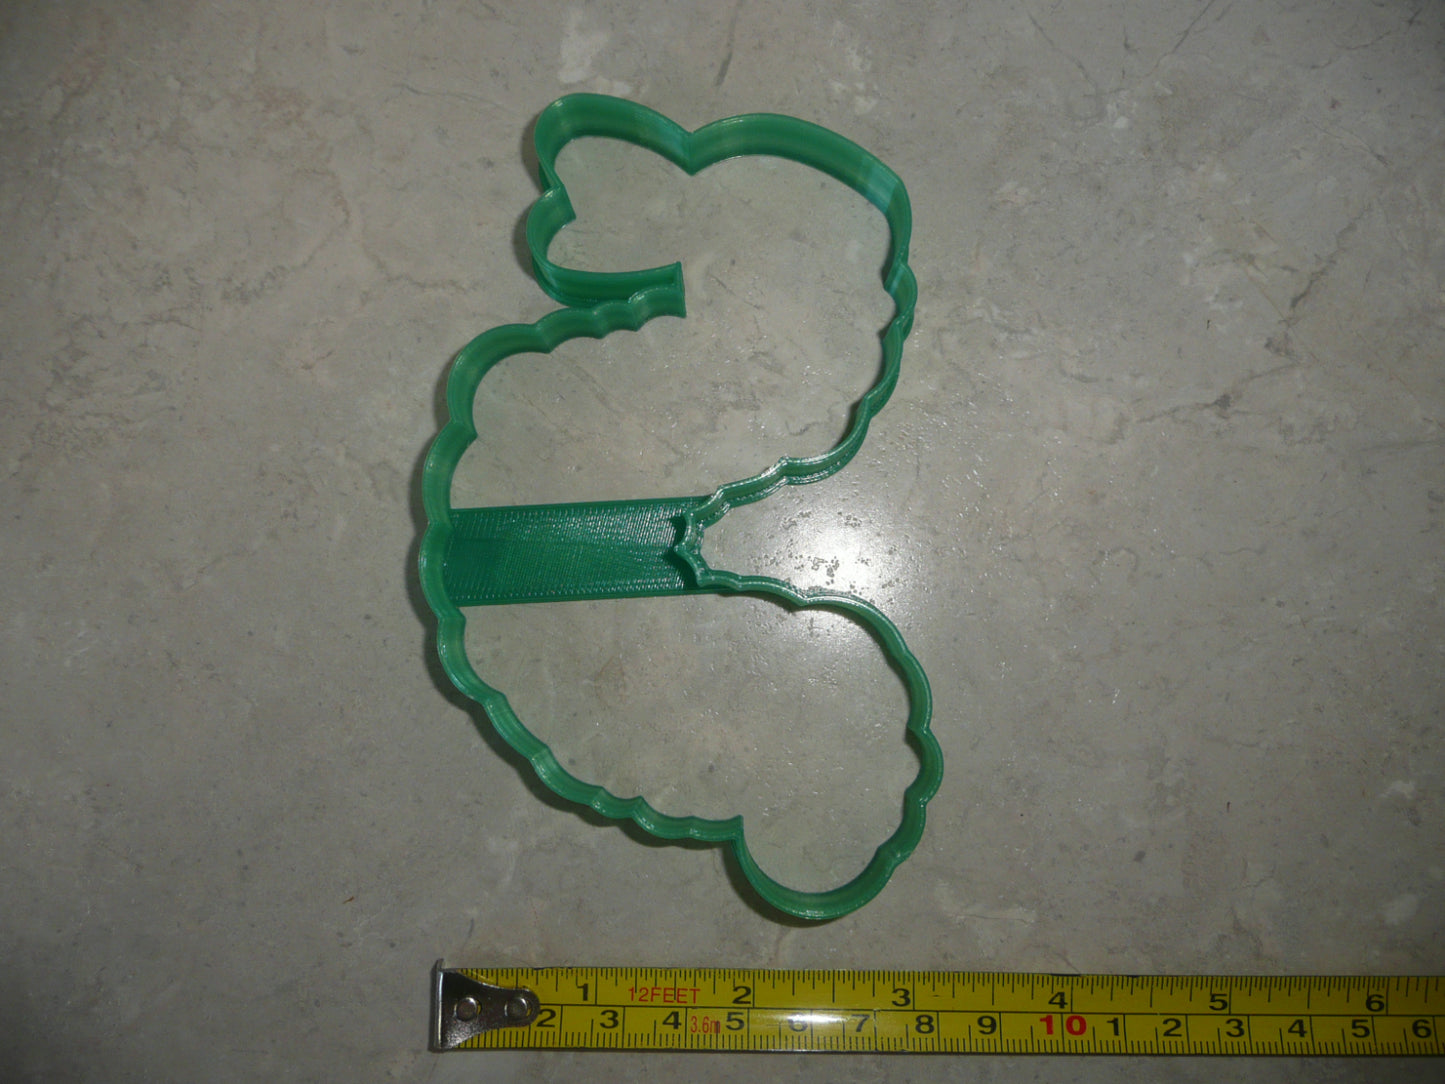 Caterpillar Insect Inch Worm Outline Cookie Cutter Made In USA PR4643